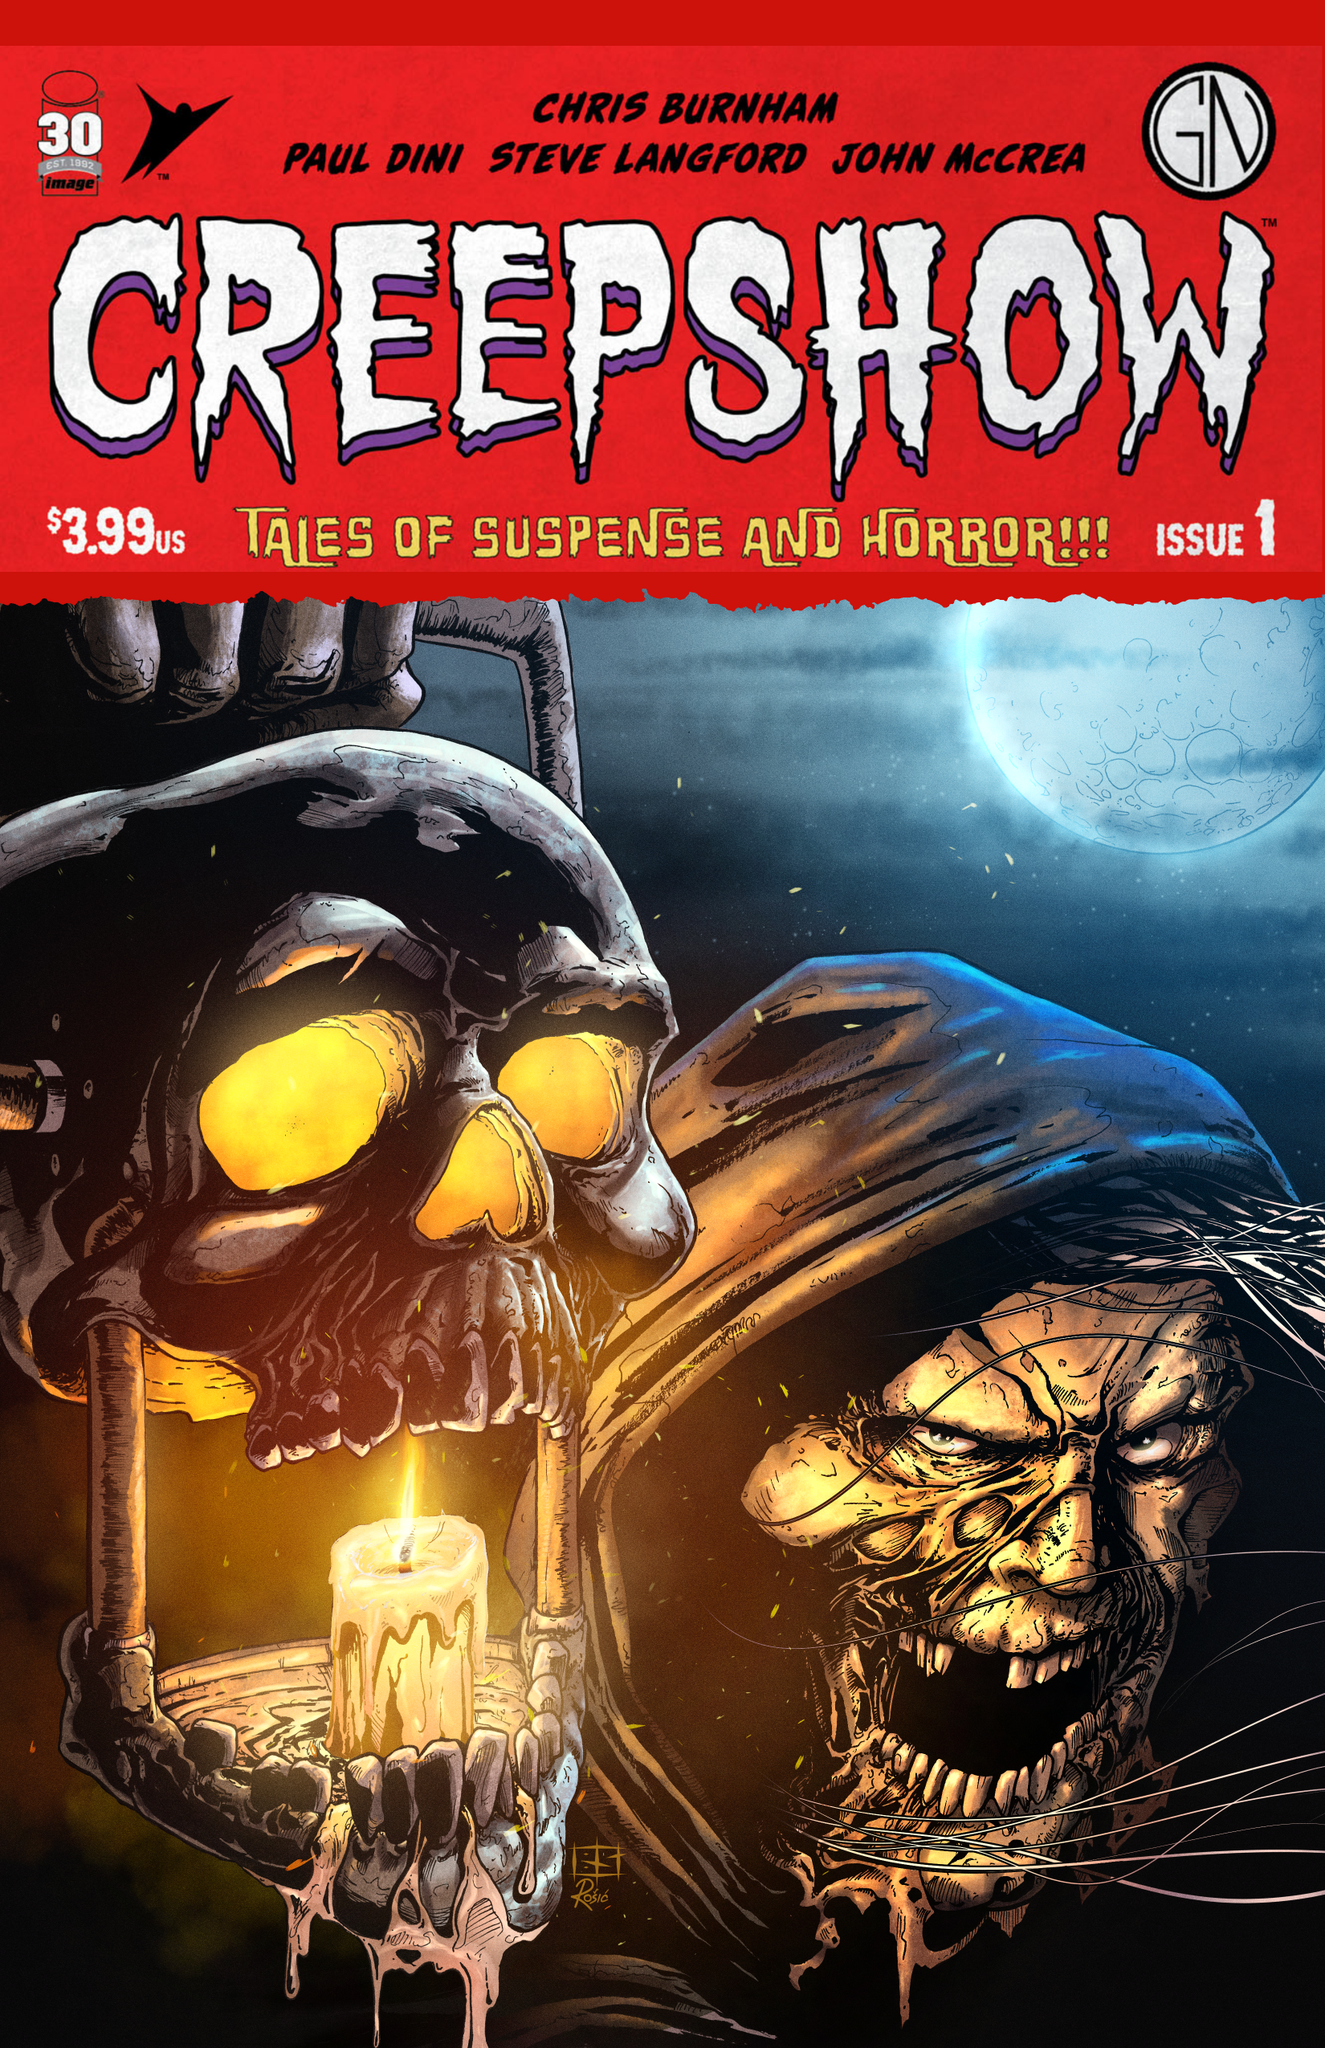 CREEPSHOW #1 BRYAN SILVERBAX VARIANT LIMITED TO 150 COPIES WITH NUMBERED COA